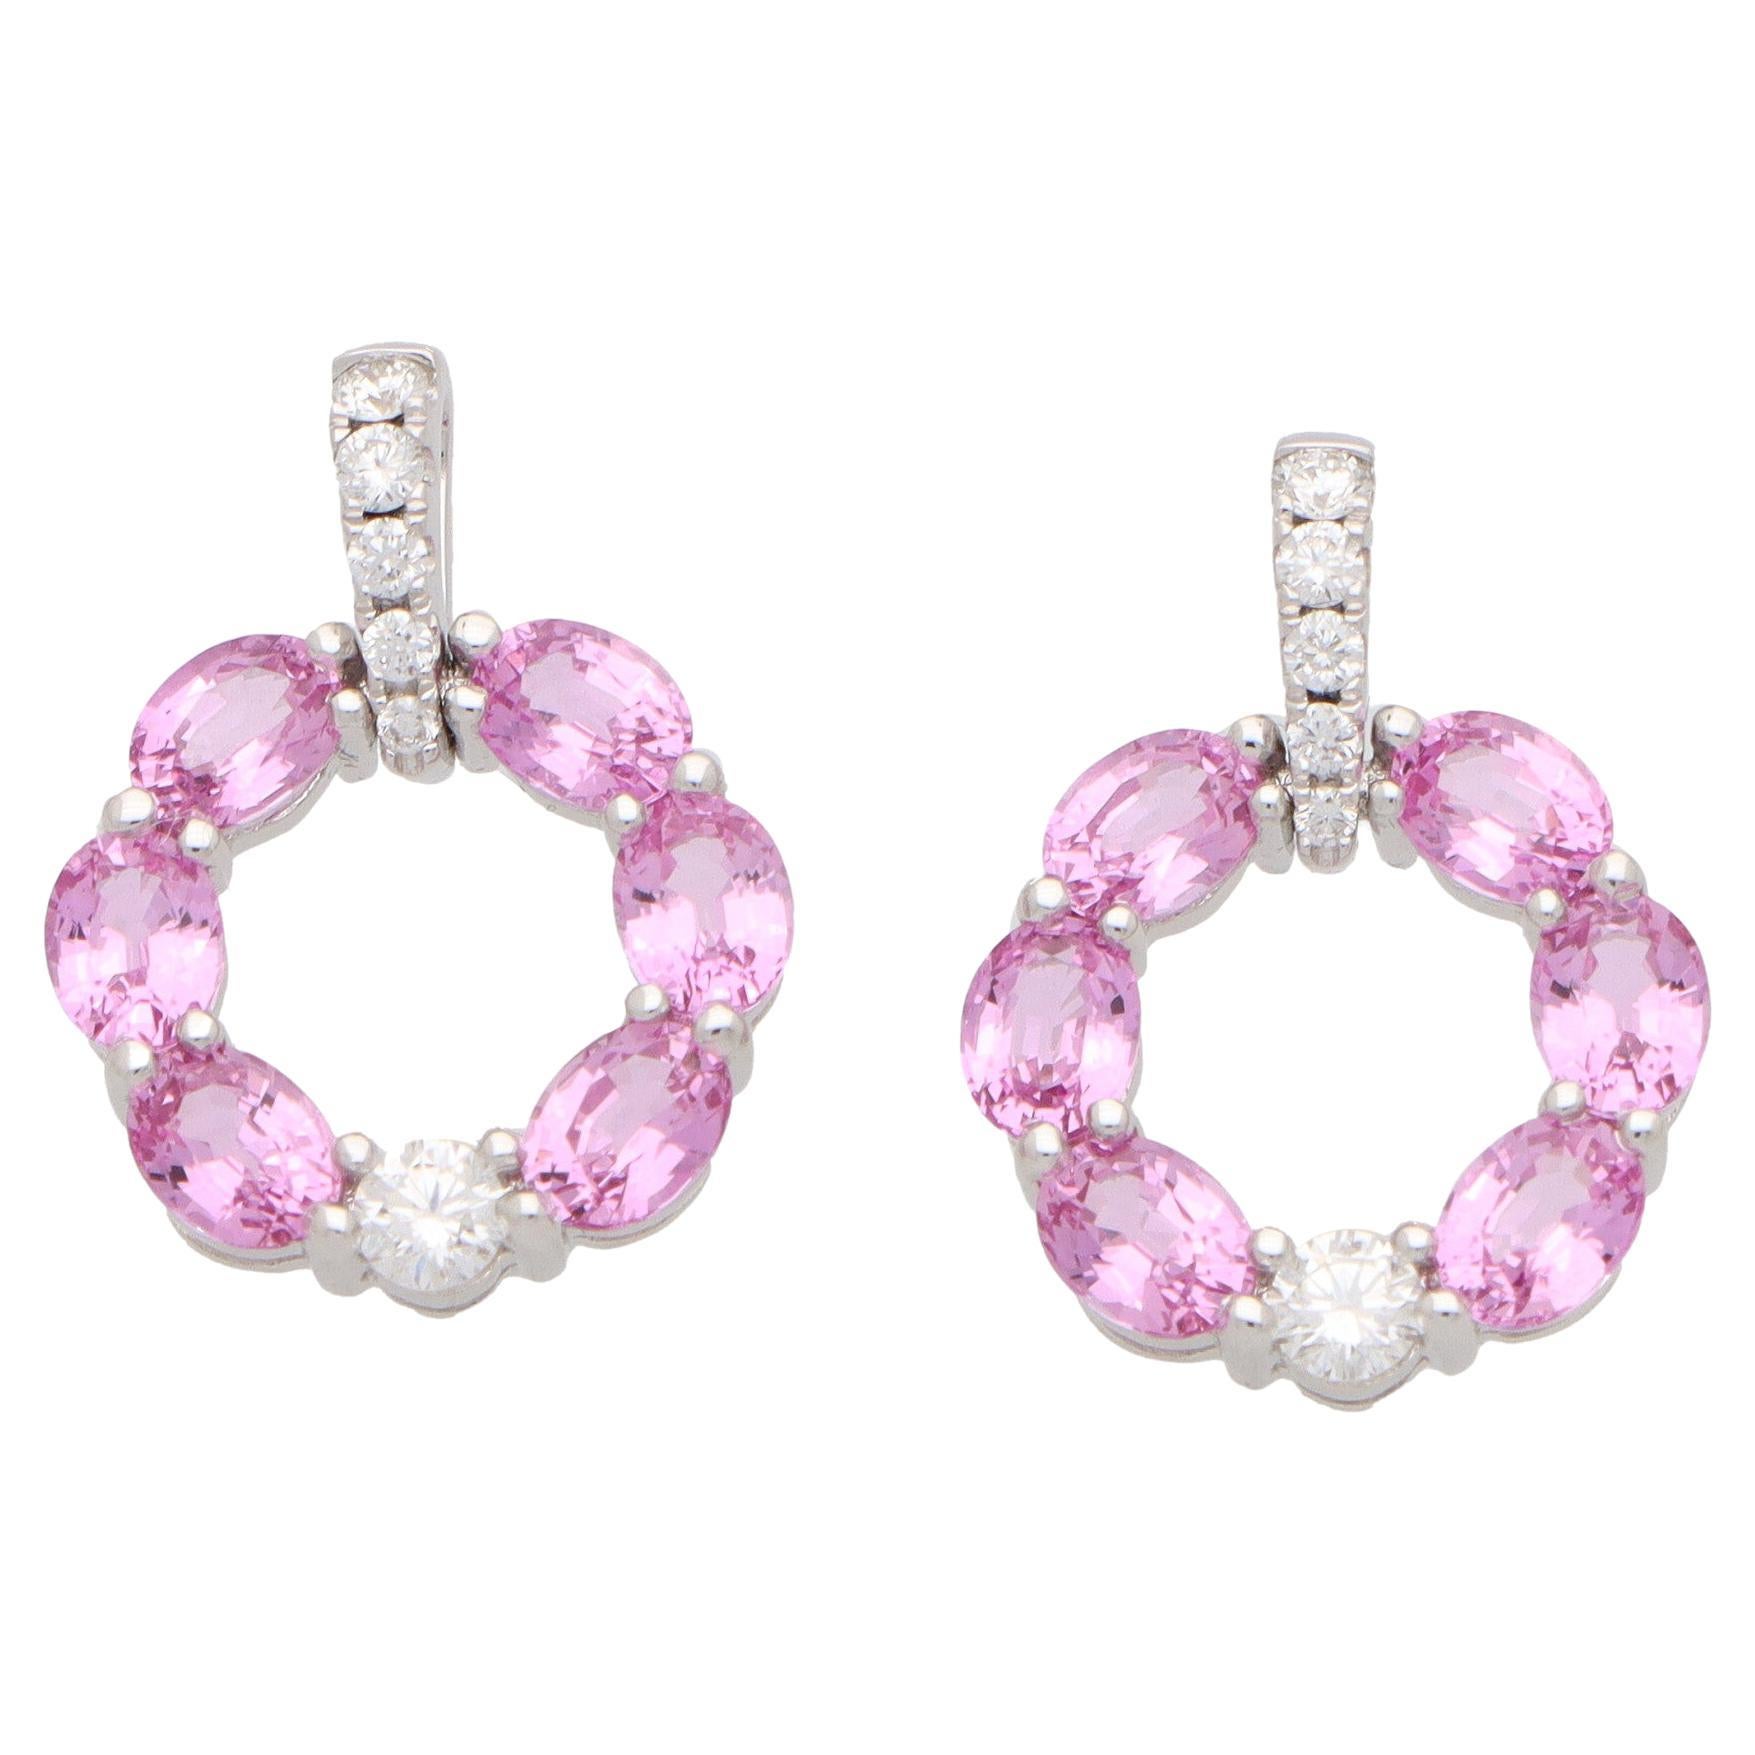 Contemporary Patel Pink Sapphire and Diamond Earrings in 18k White Gold